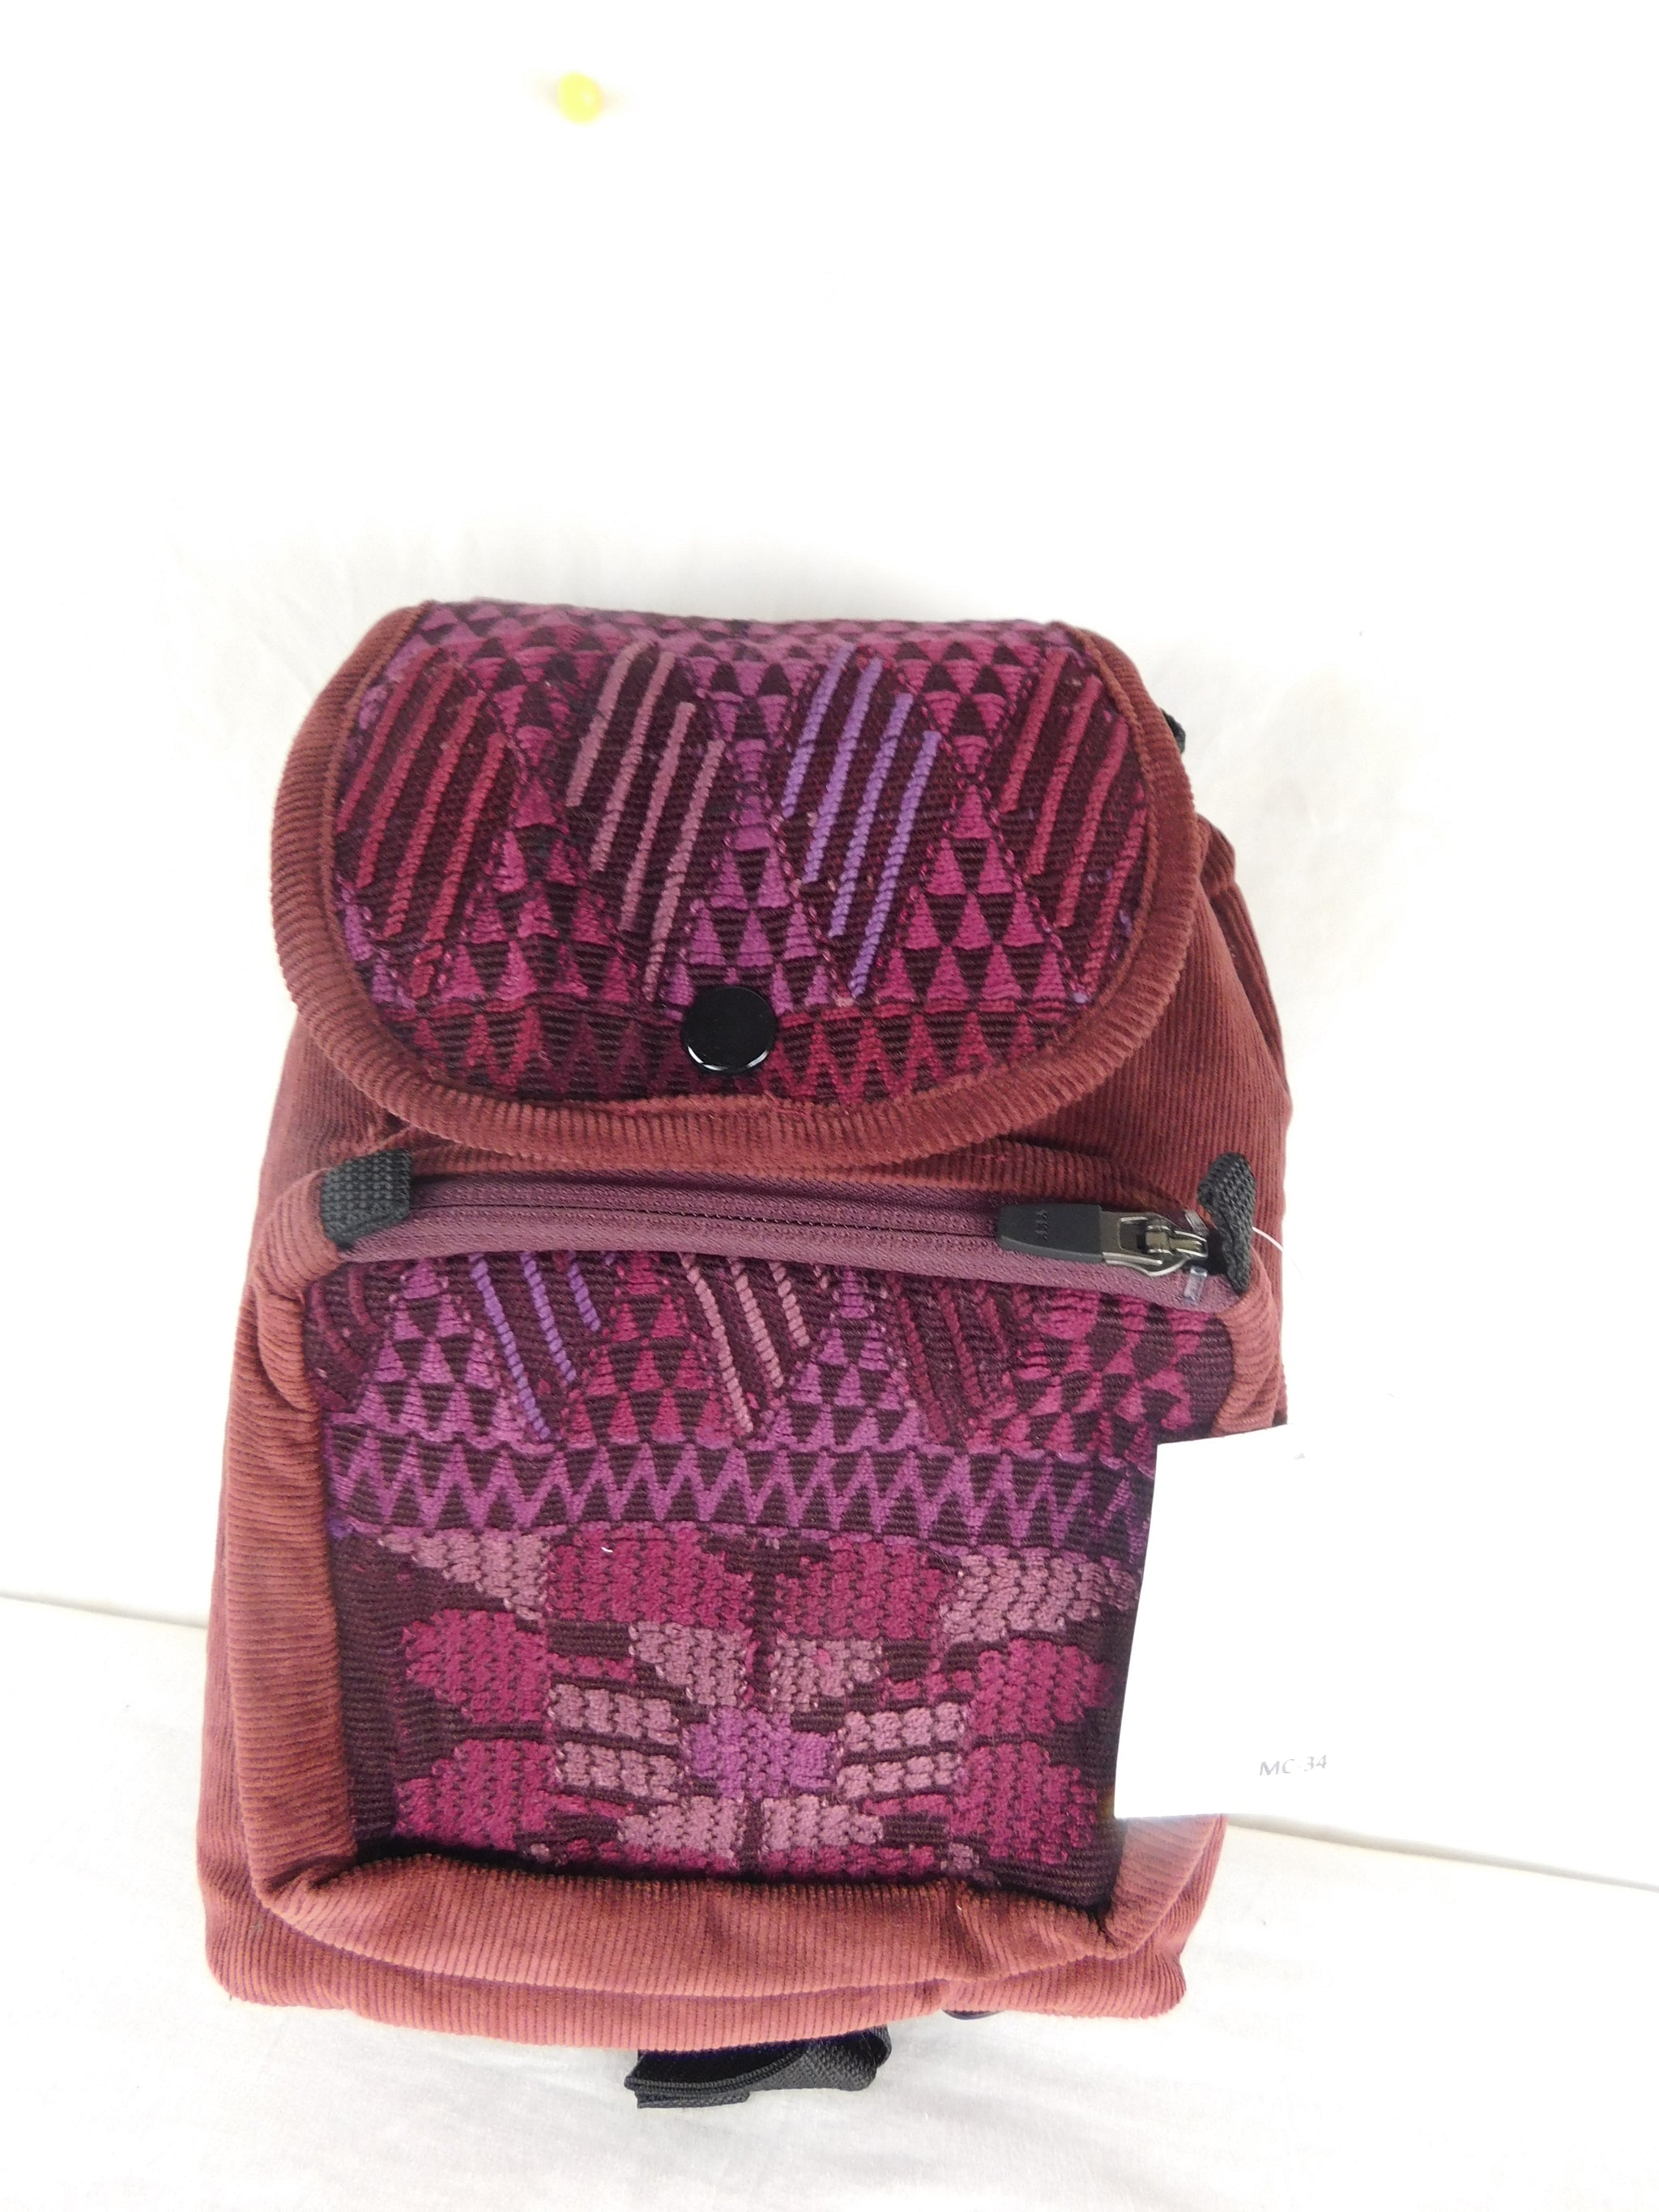  Mini backpack in corduroy with hand brocaded accents Description